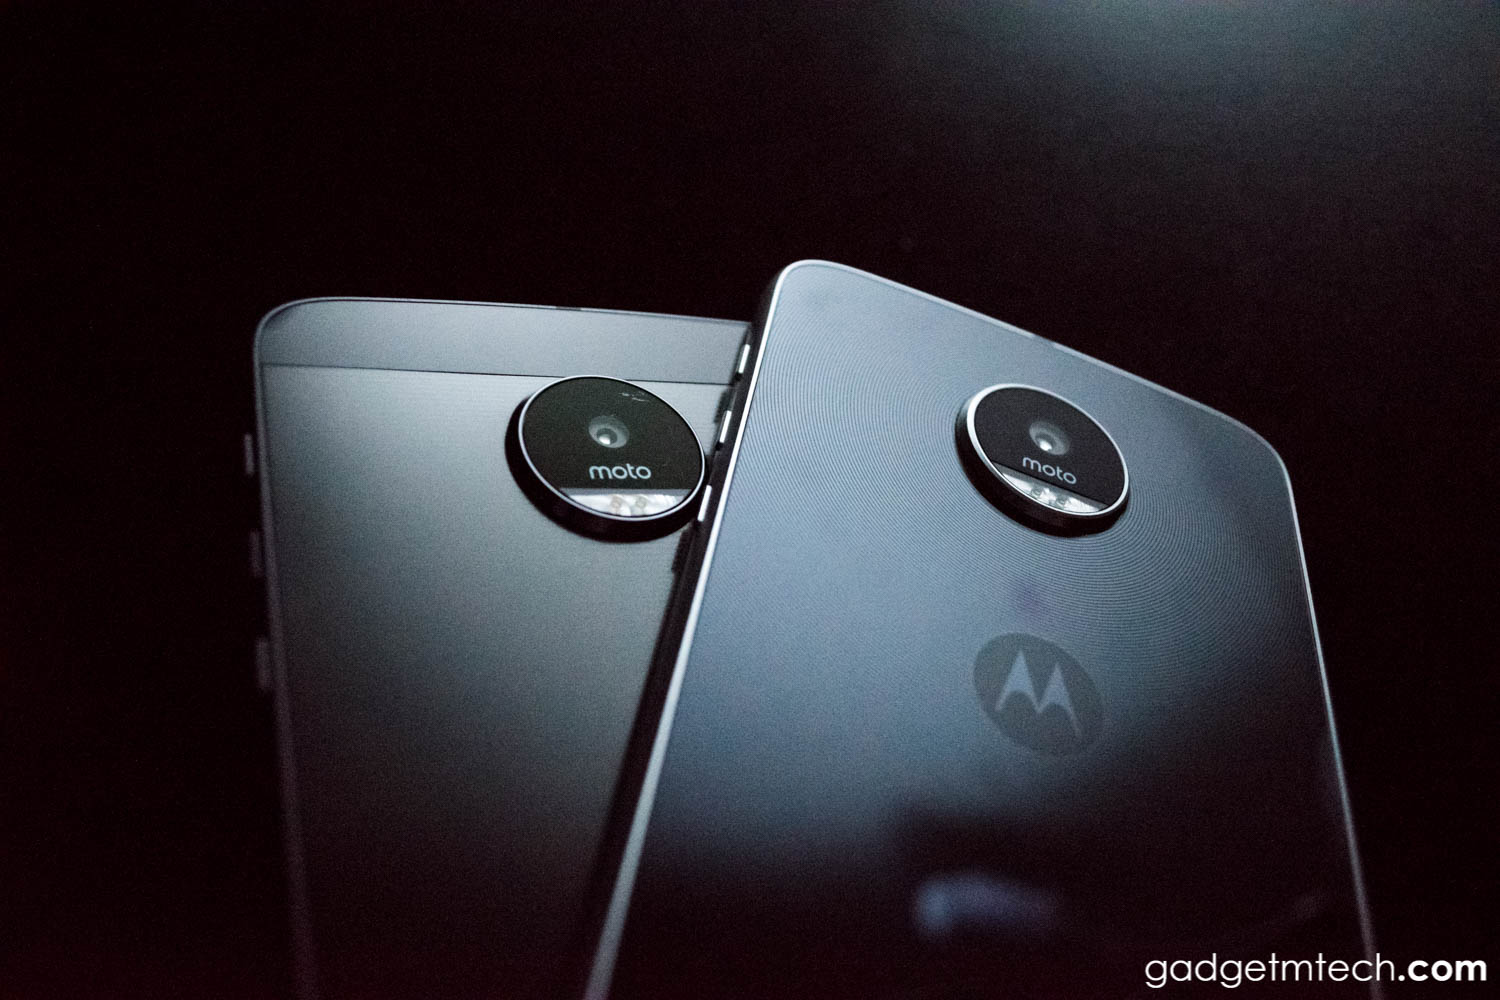 Moto Z and Moto Z Play Review (w/ Moto Mods): The Future Is Here